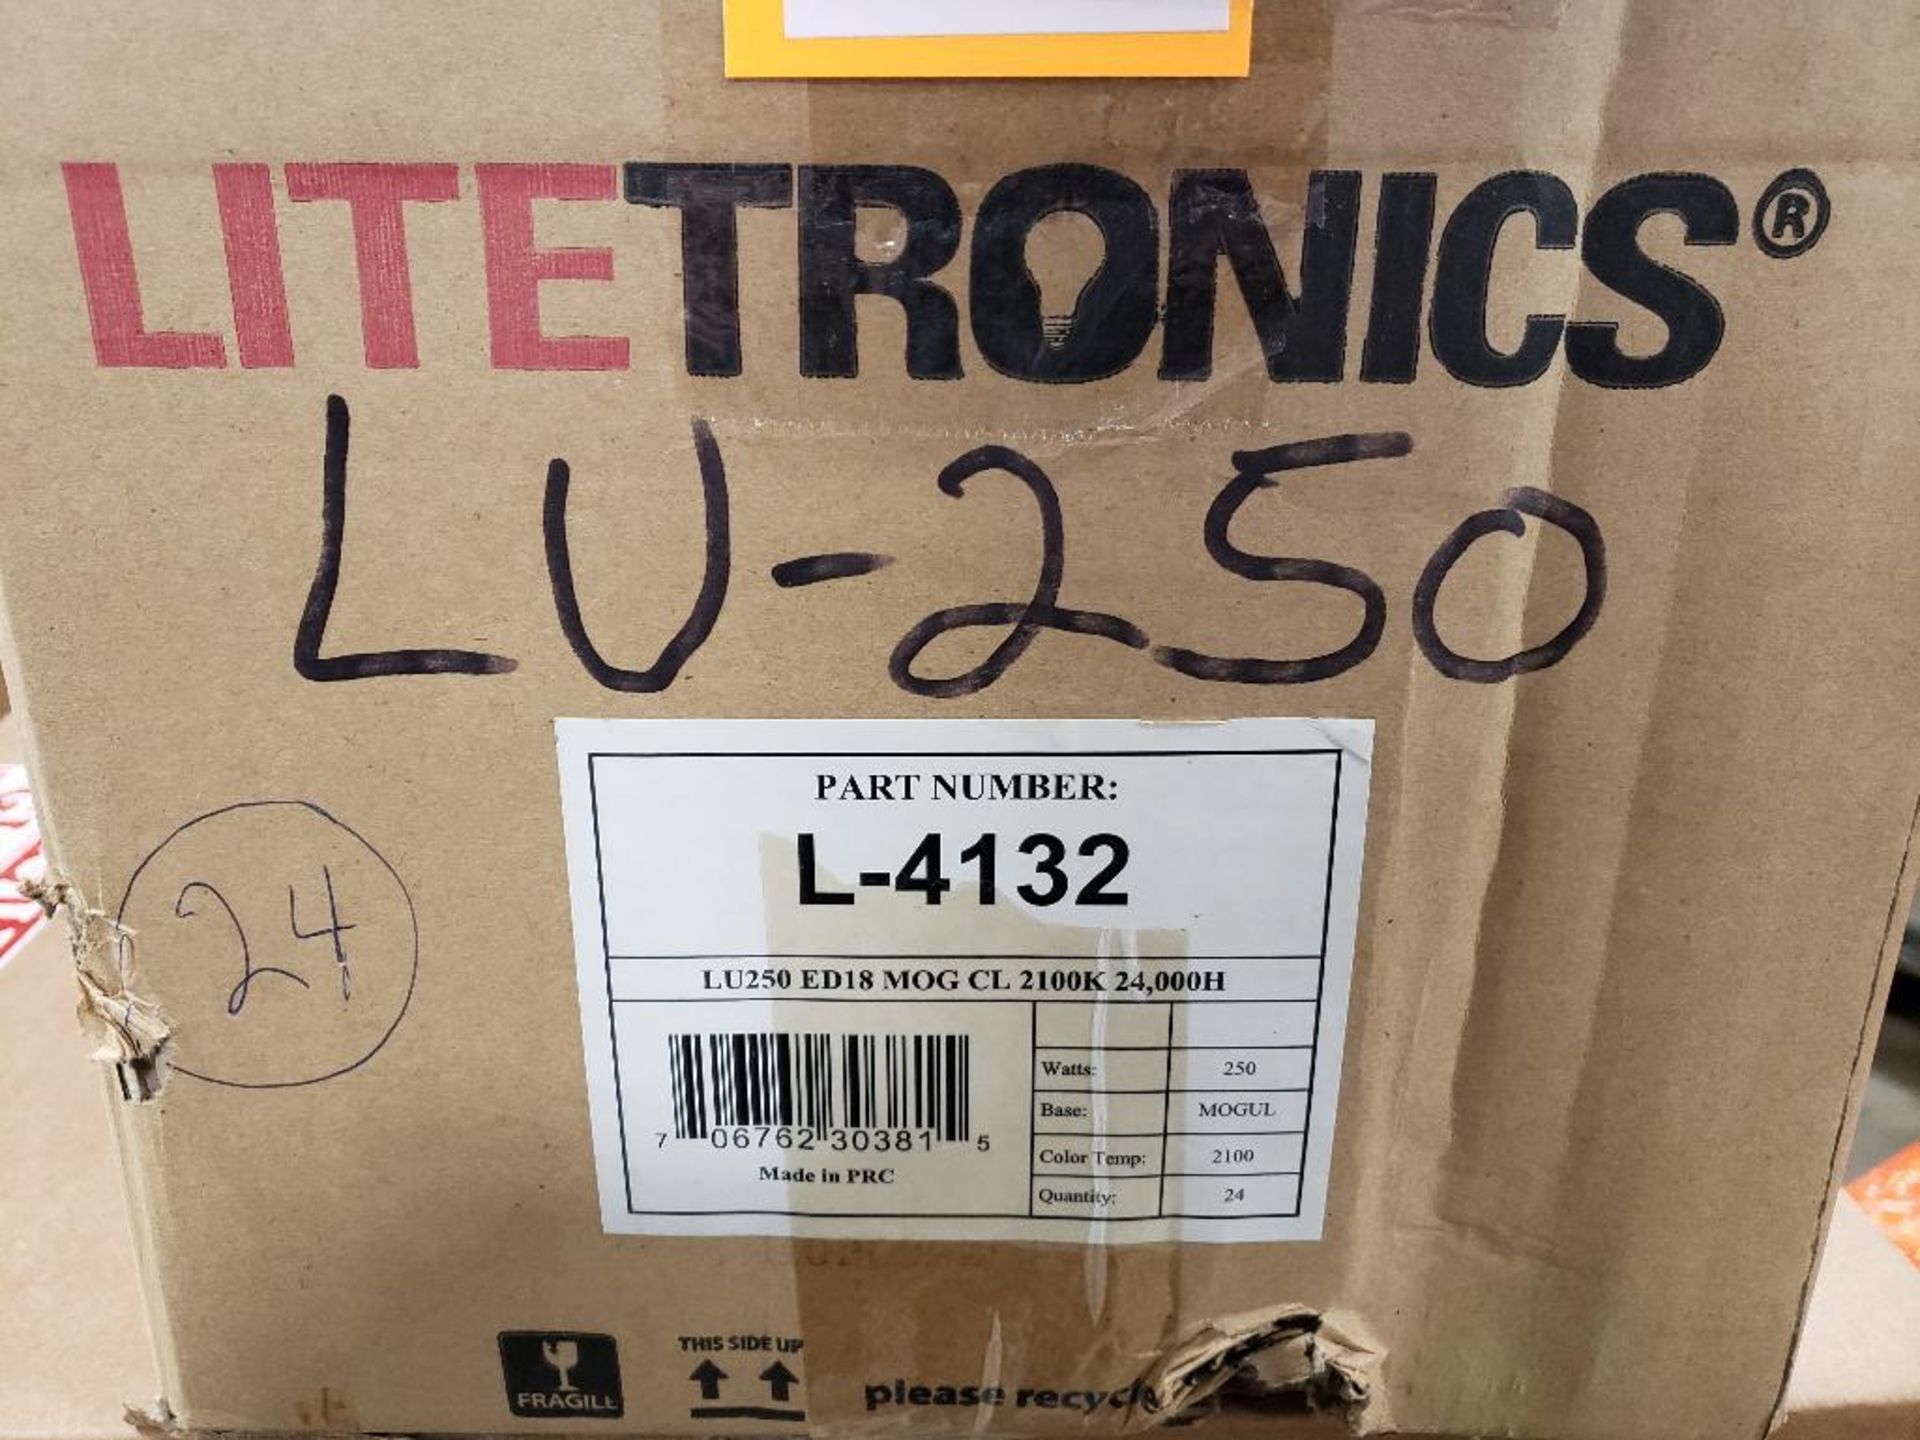 Qty 12 - Litetronics light. Part number L-4125. New in box. - Image 2 of 3